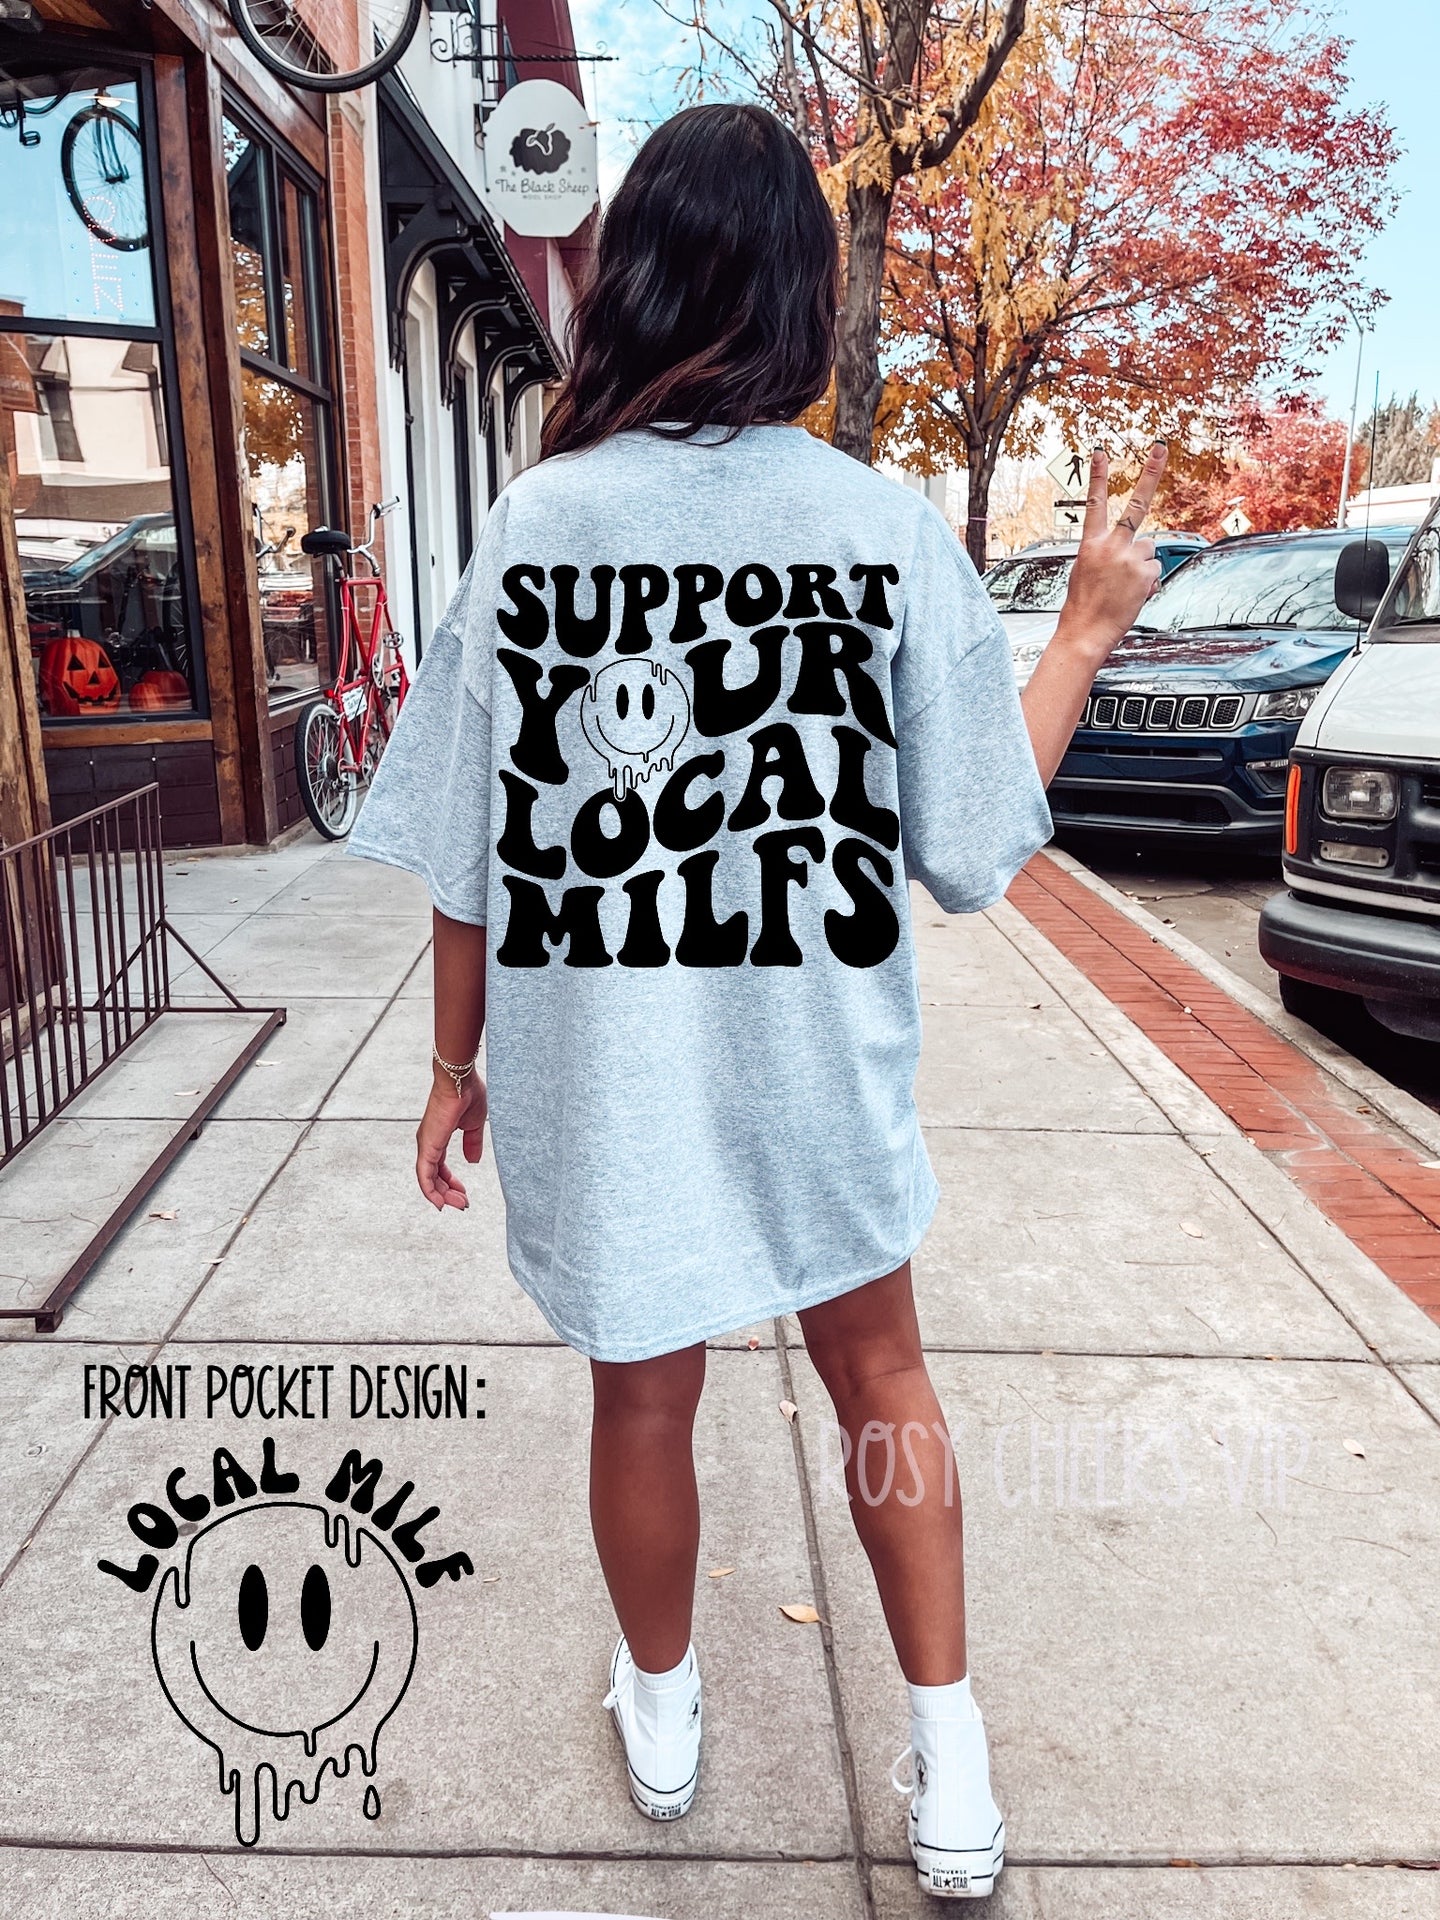 (PRE ORDER) support local milfs